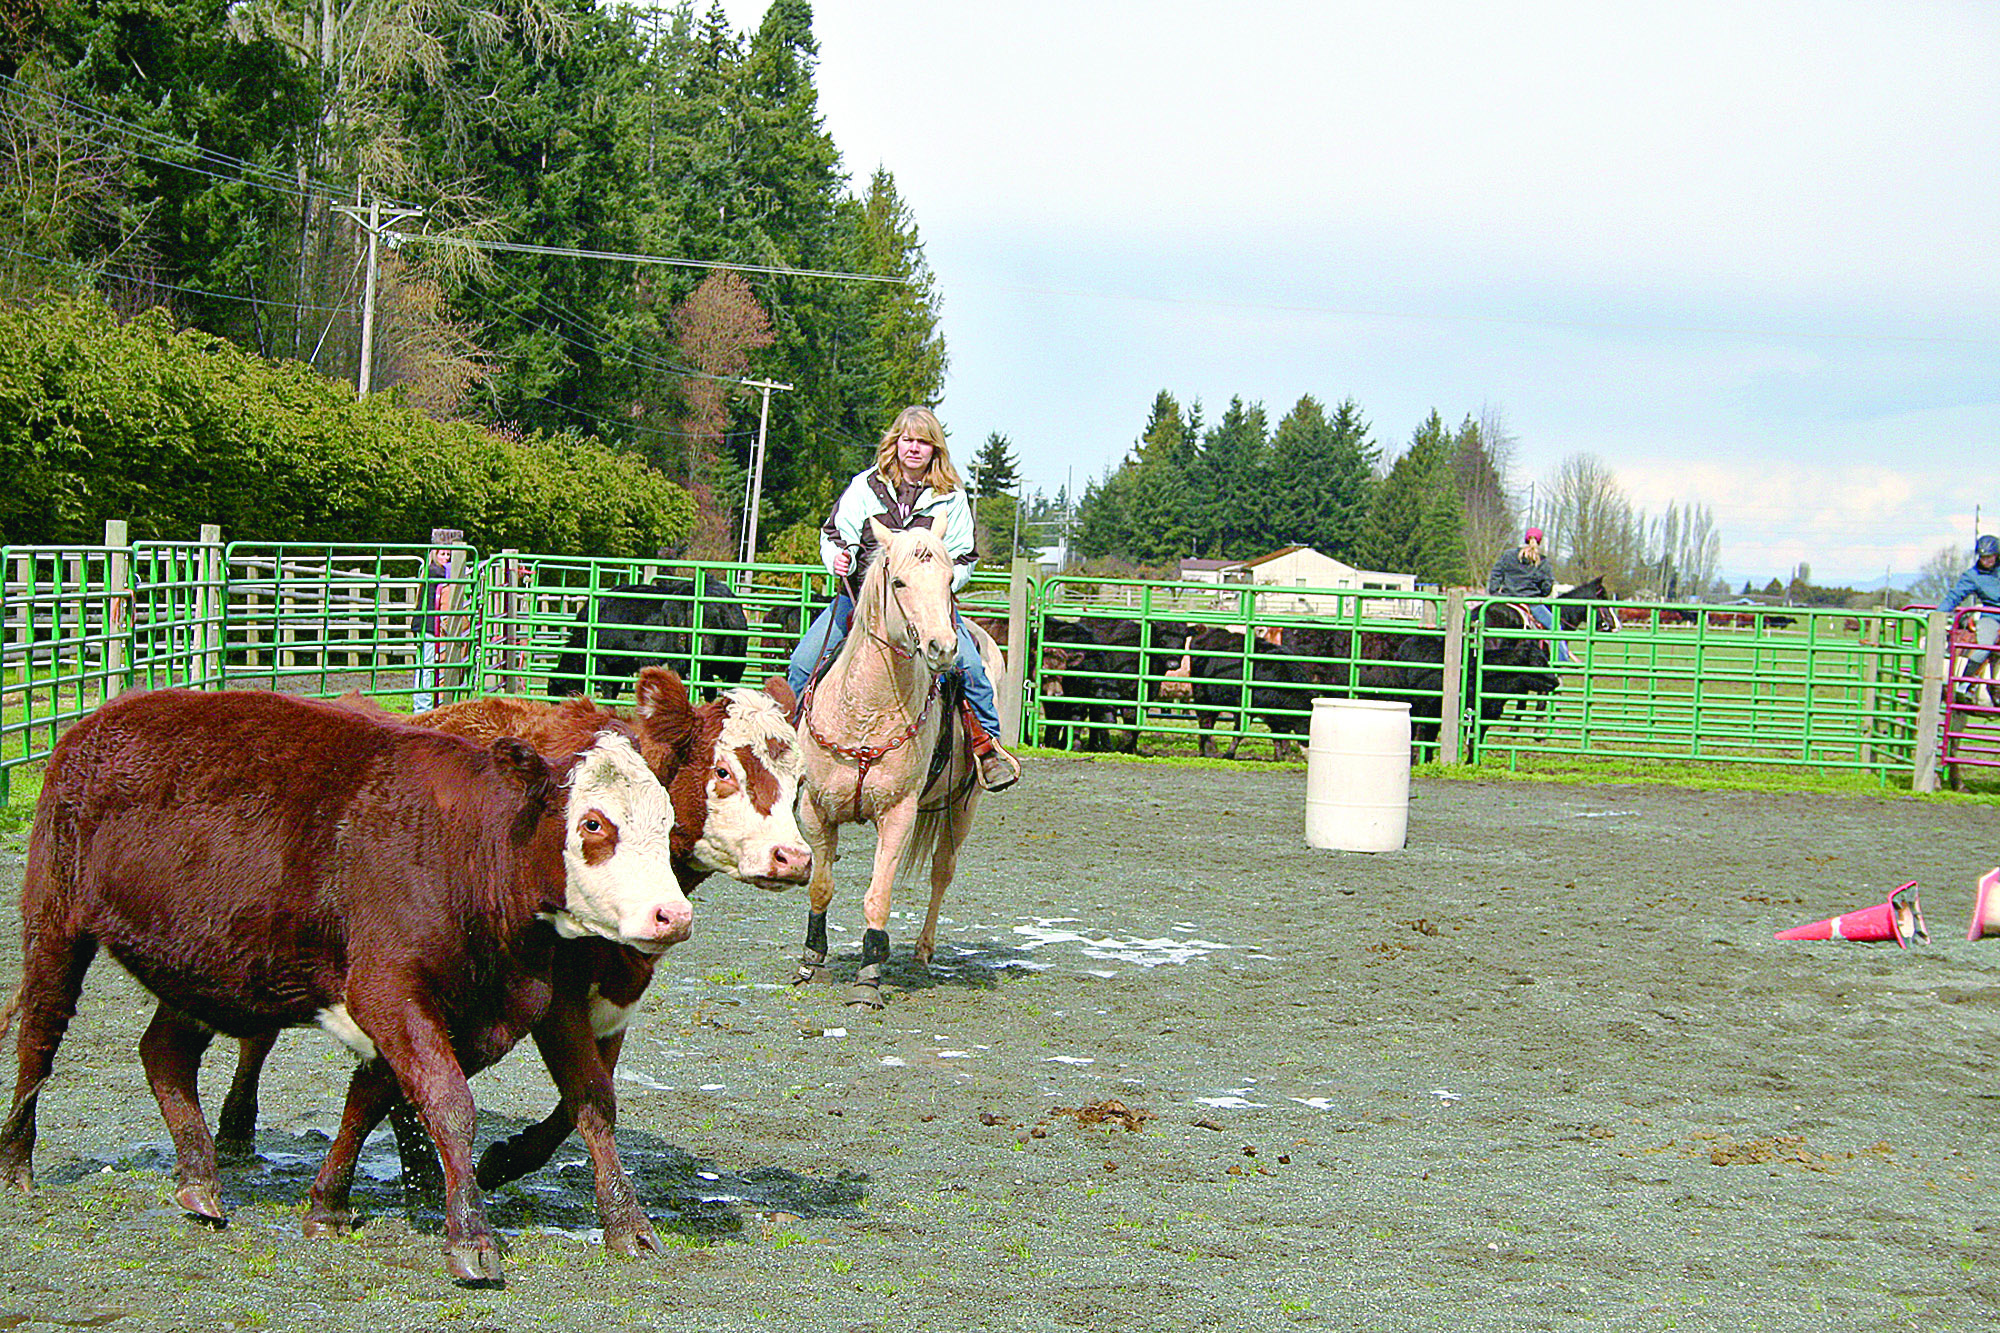 During a cow-working clinic at Freedom Farm in Port Angeles